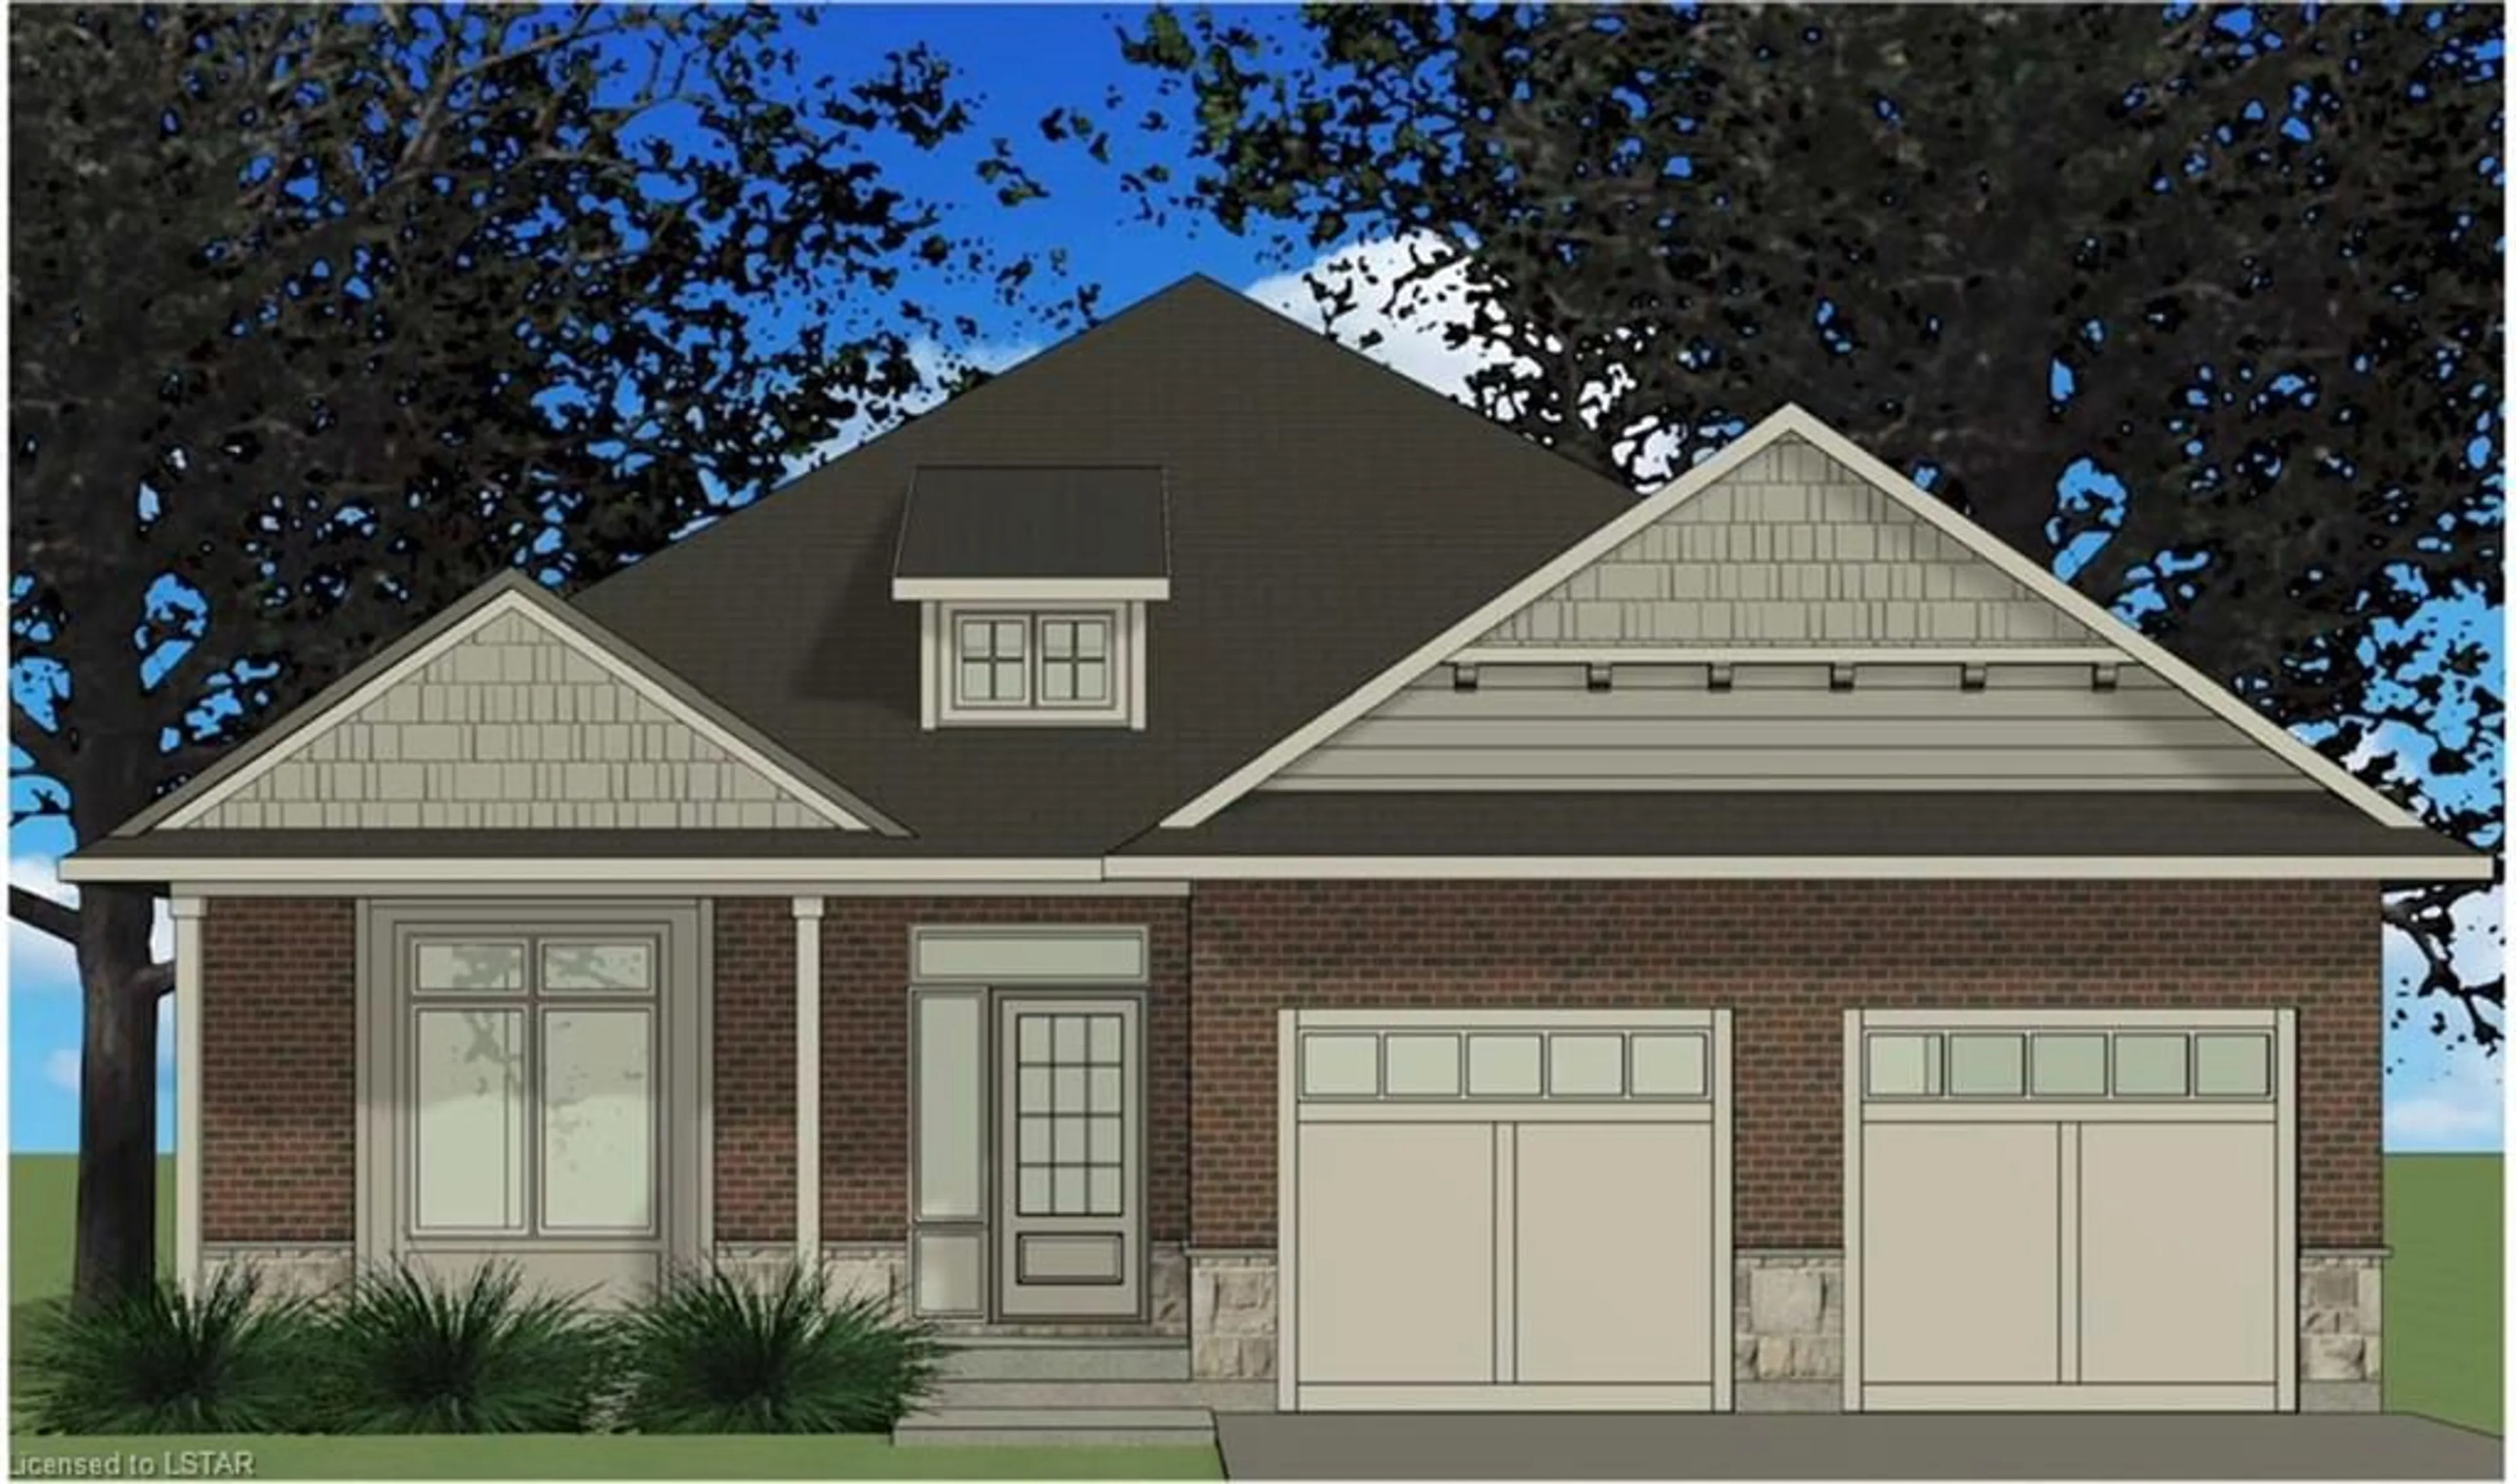 Home with brick exterior material for 194 Timberwalk Trail, Ilderton Ontario N0M 2A0